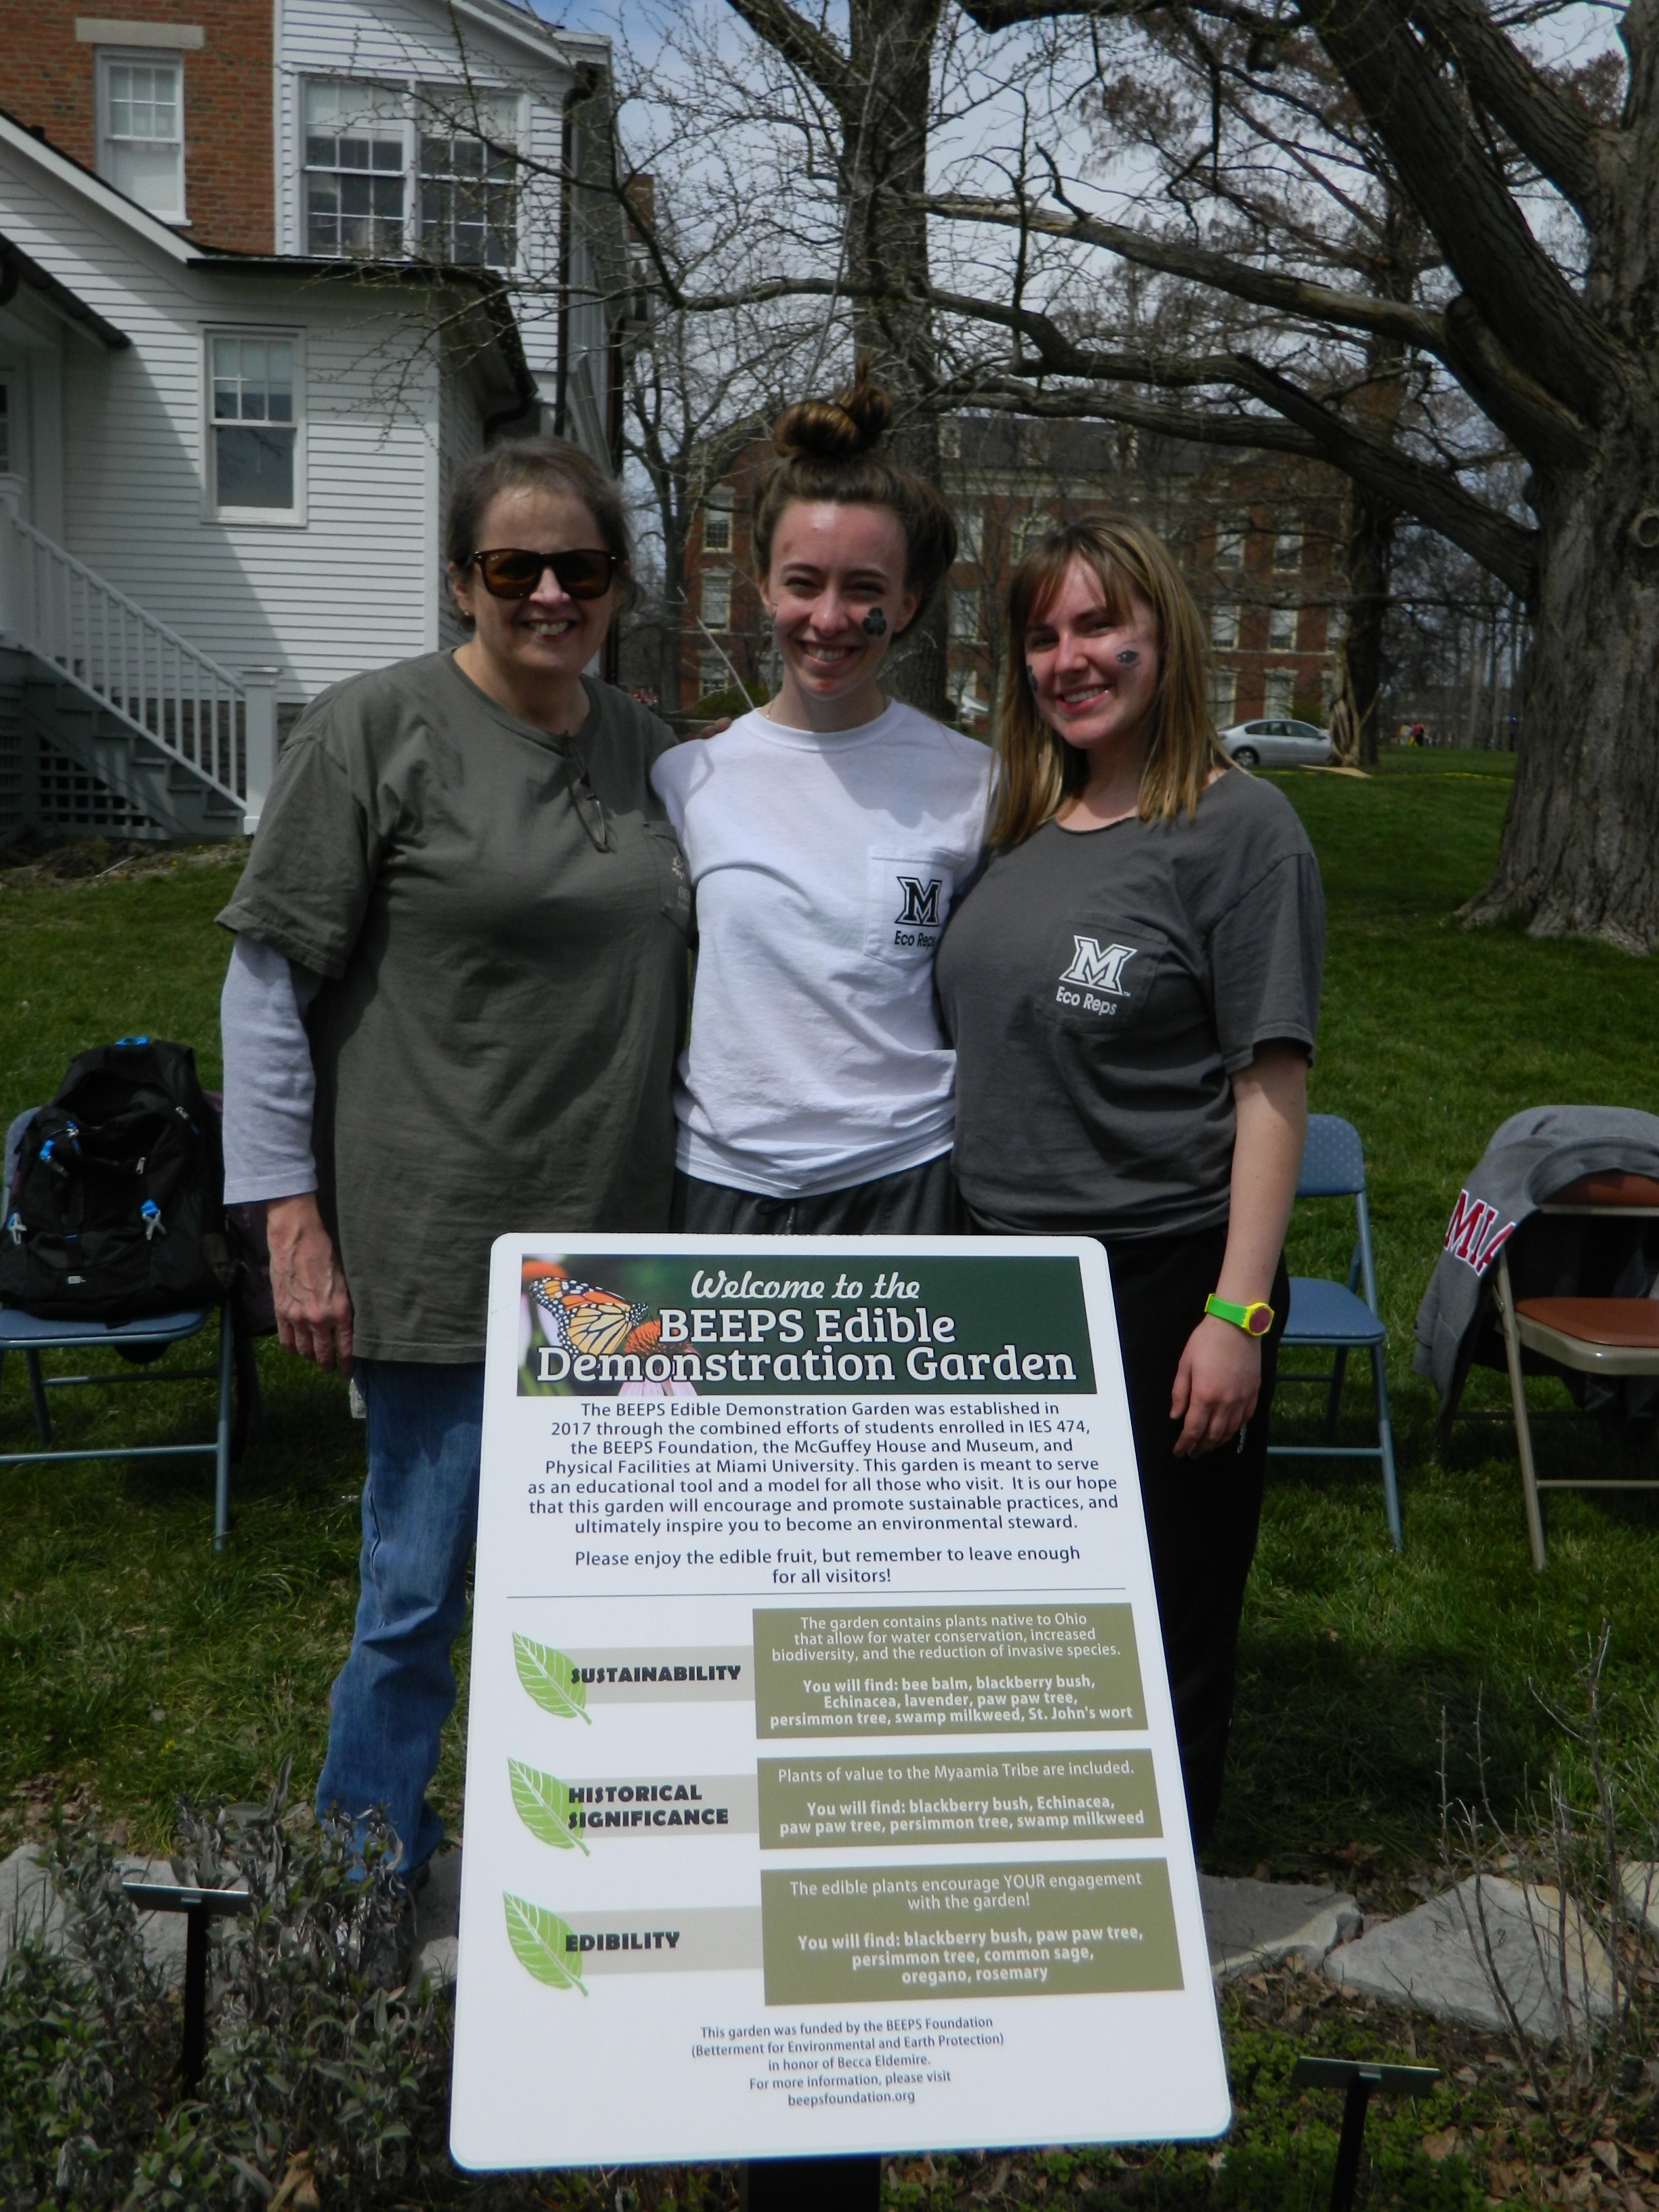 Students pose in front of a poster advertising the BEEPS garden at McGuffey House